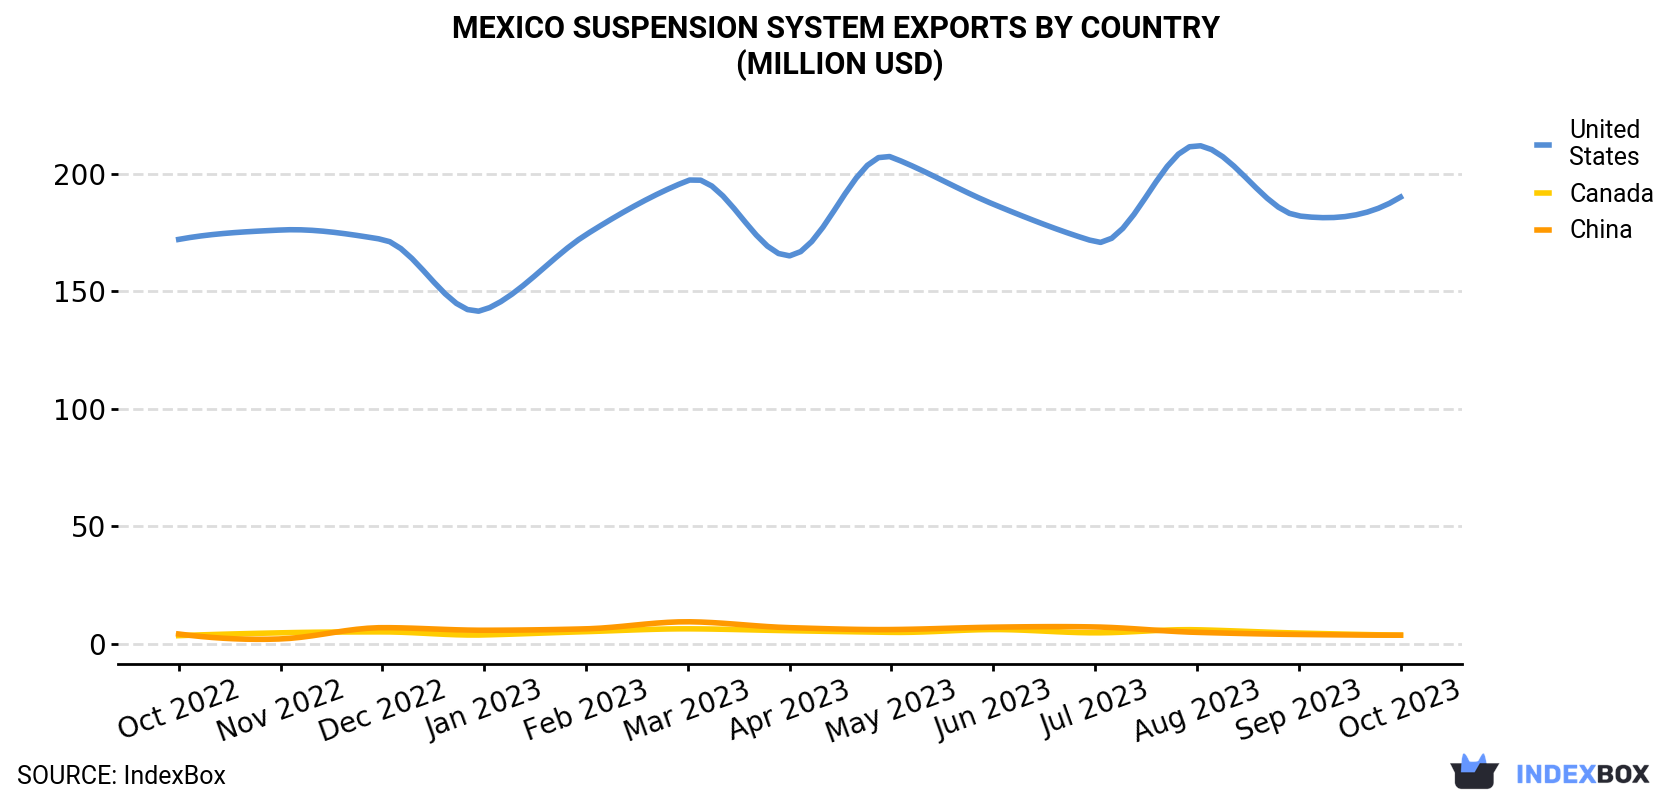 Mexico Suspension System Exports By Country (Million USD)